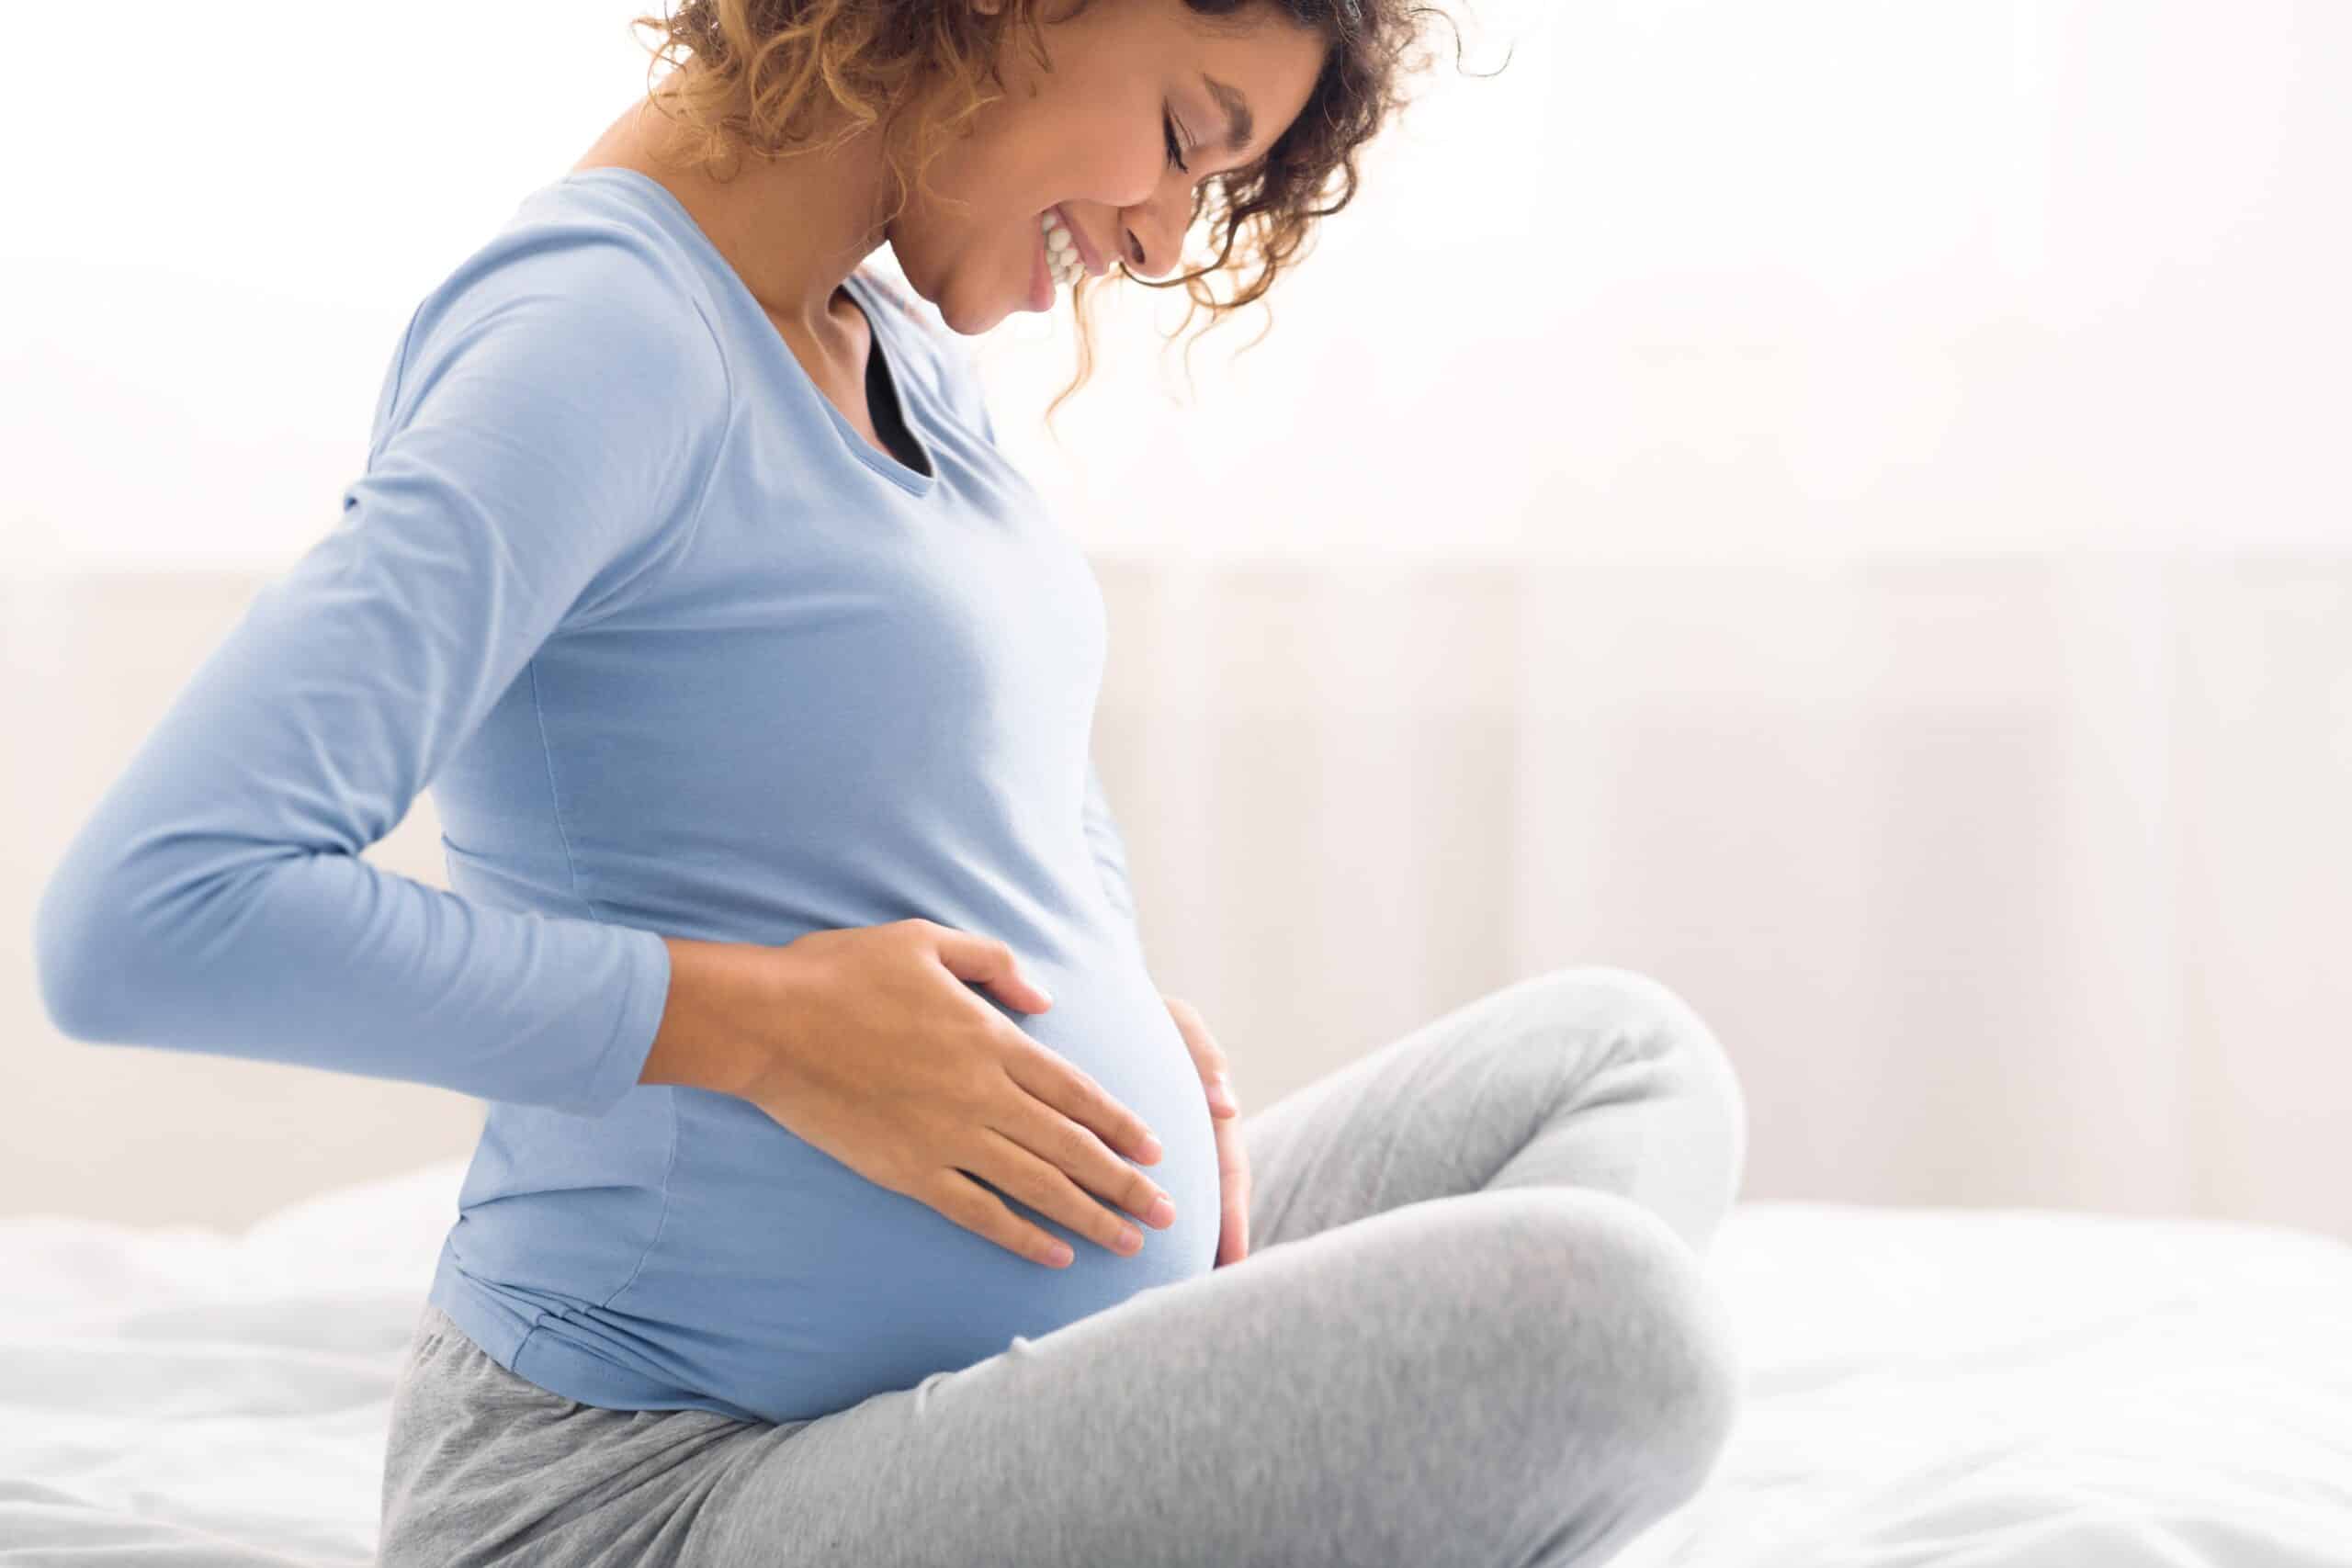 Smiling pregnant woman holding her belly while sitting